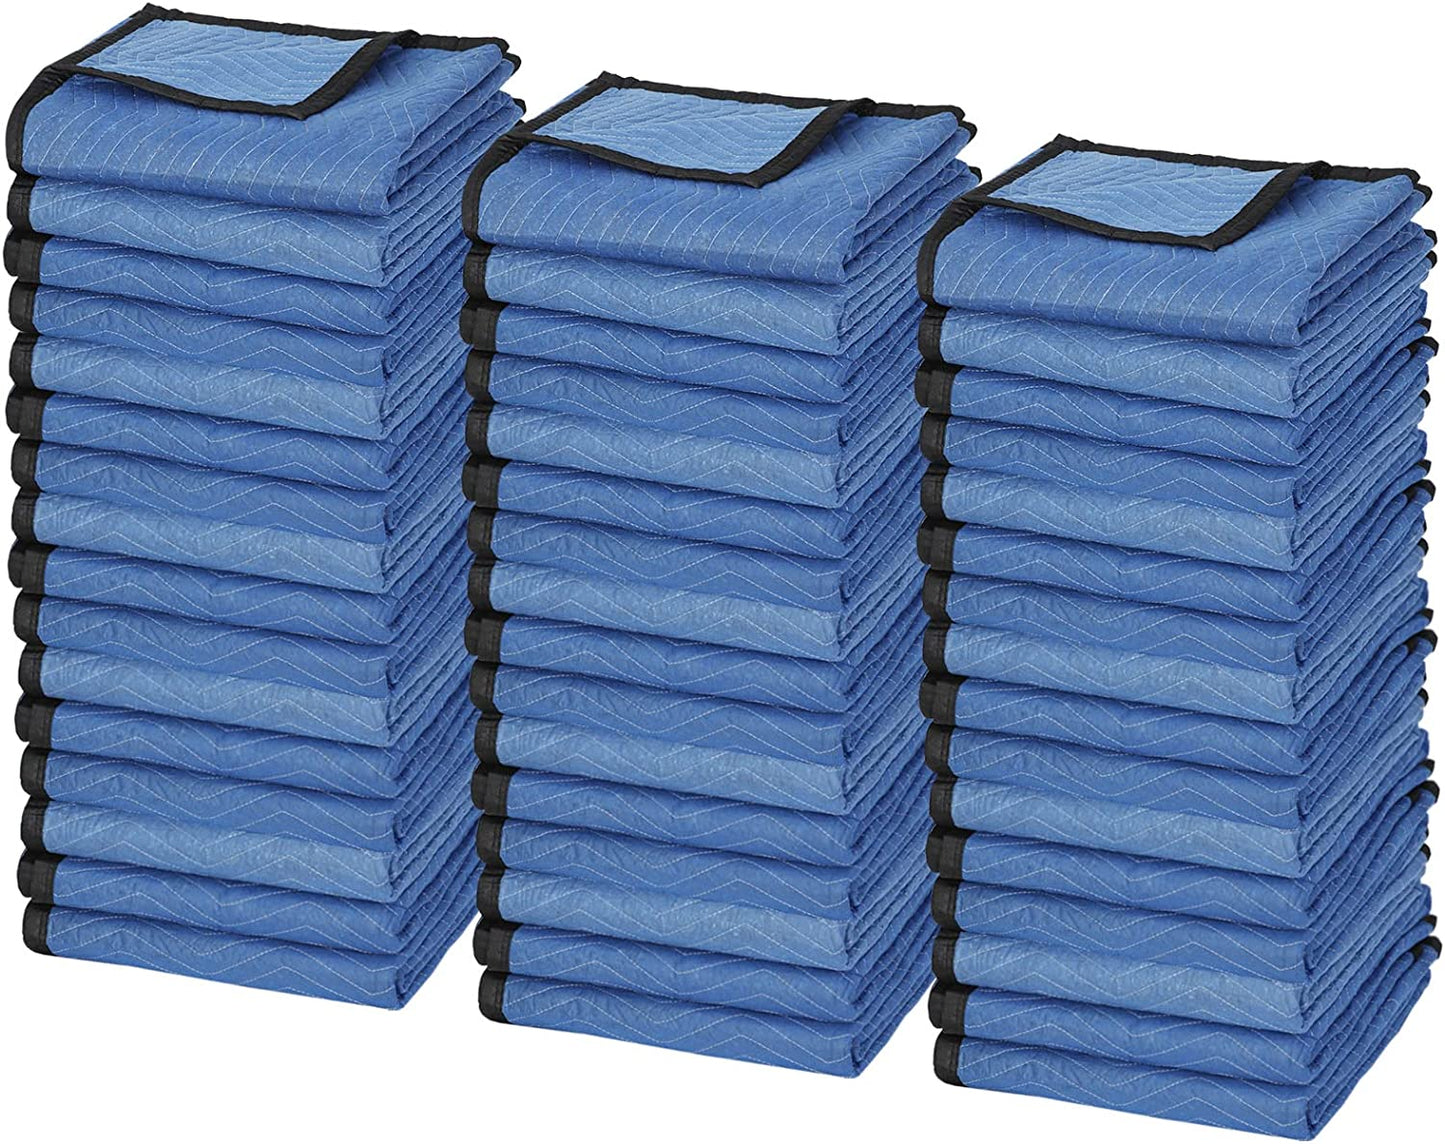 48 Pack Moving Packing Blankets 80’’x 72’’(35 lb/dz Weight) Pro Quilted Shipping Furniture Pads Mover Moving Pads